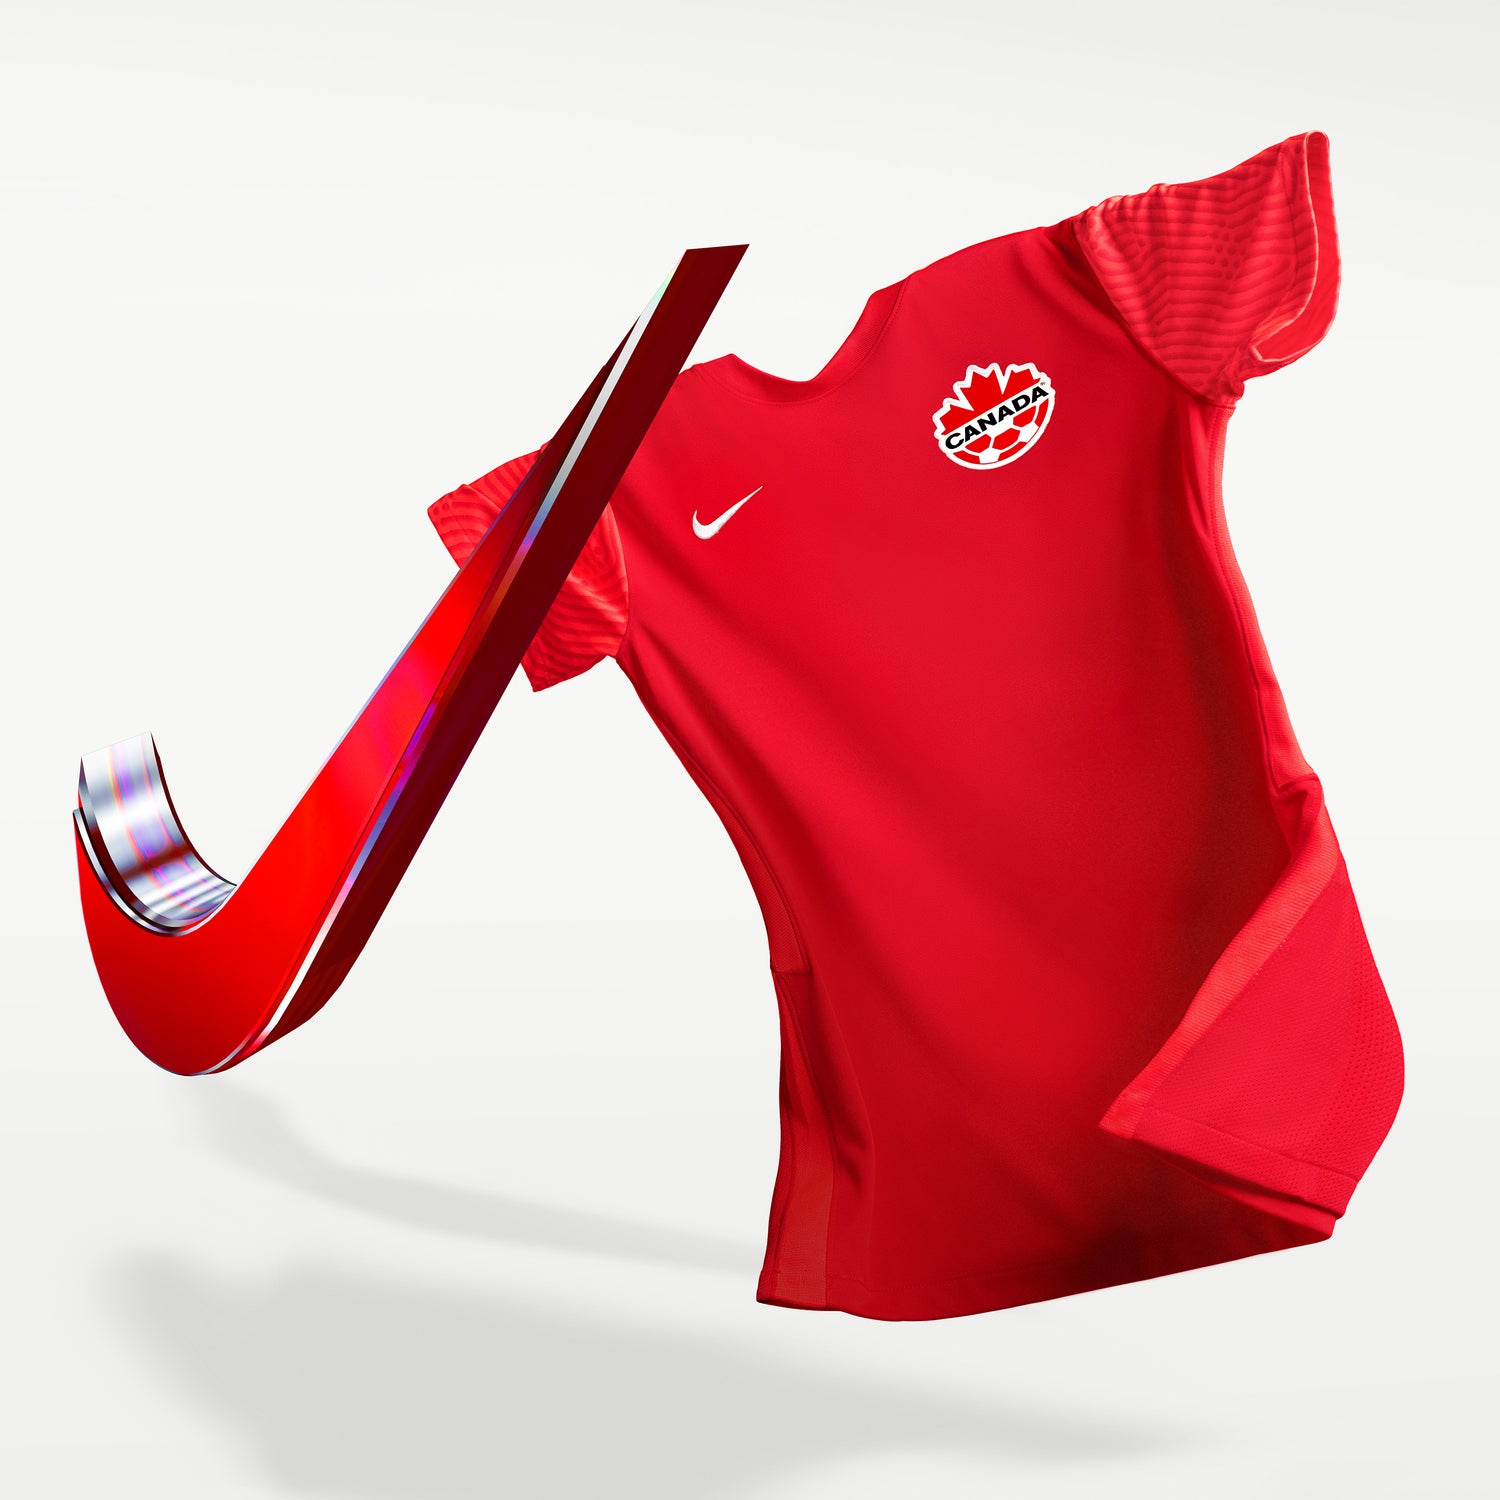 canada world cup jersey nike